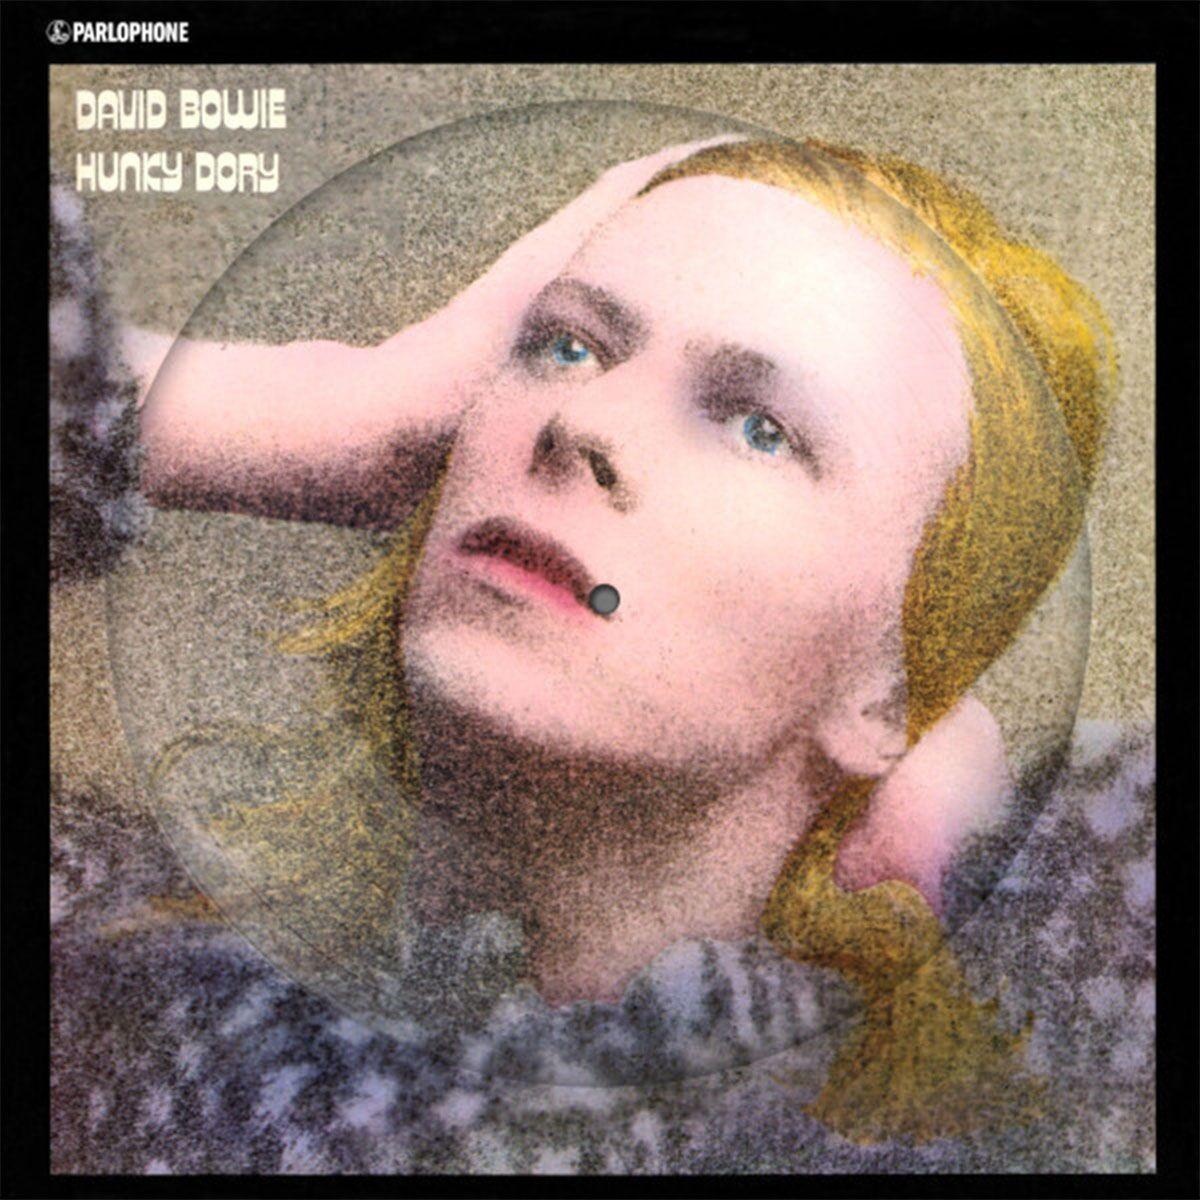 Bowie David Hunky Dory (50TH ANNIVERSARY, Limited Edition, Picture Disc) LP